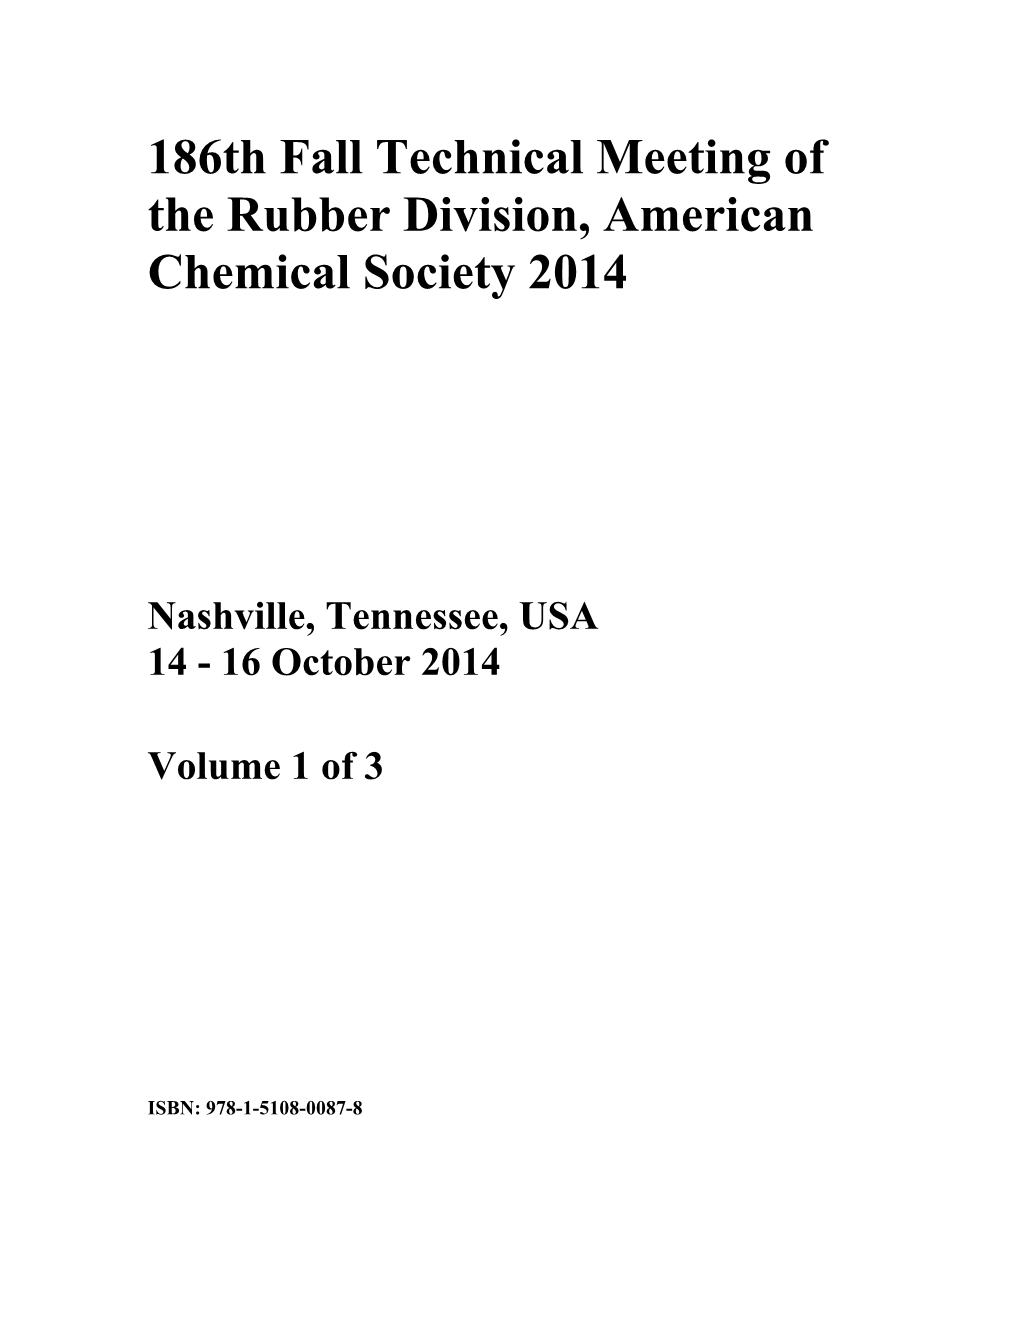 186Th Fall Technical Meeting of the Rubber Division, American Chemical Society 2014